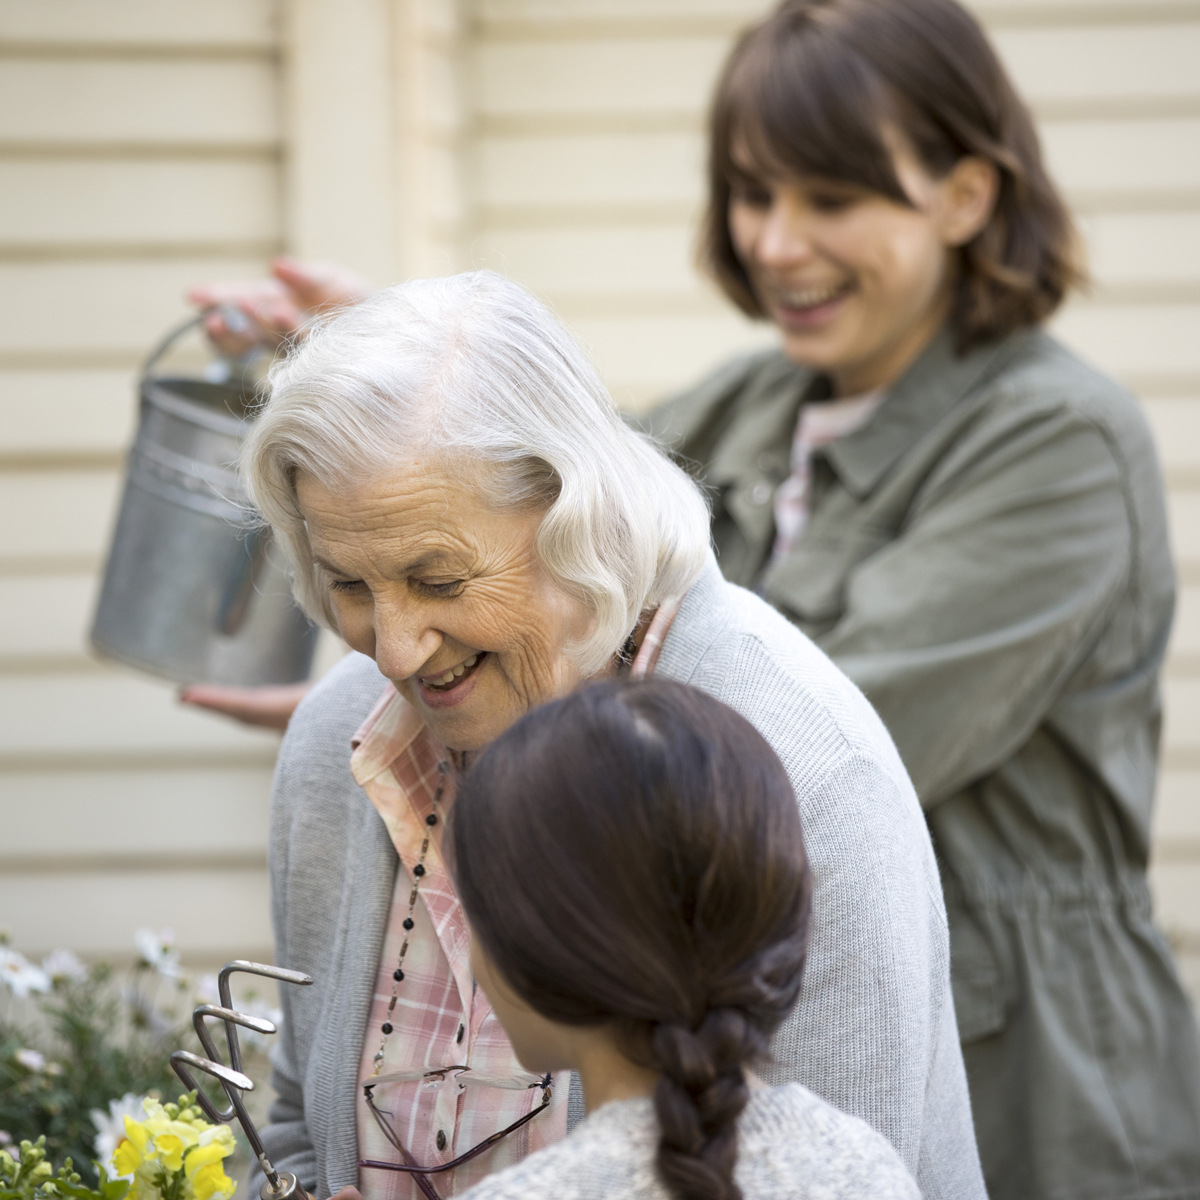 A caregiver helps a loved one garden.